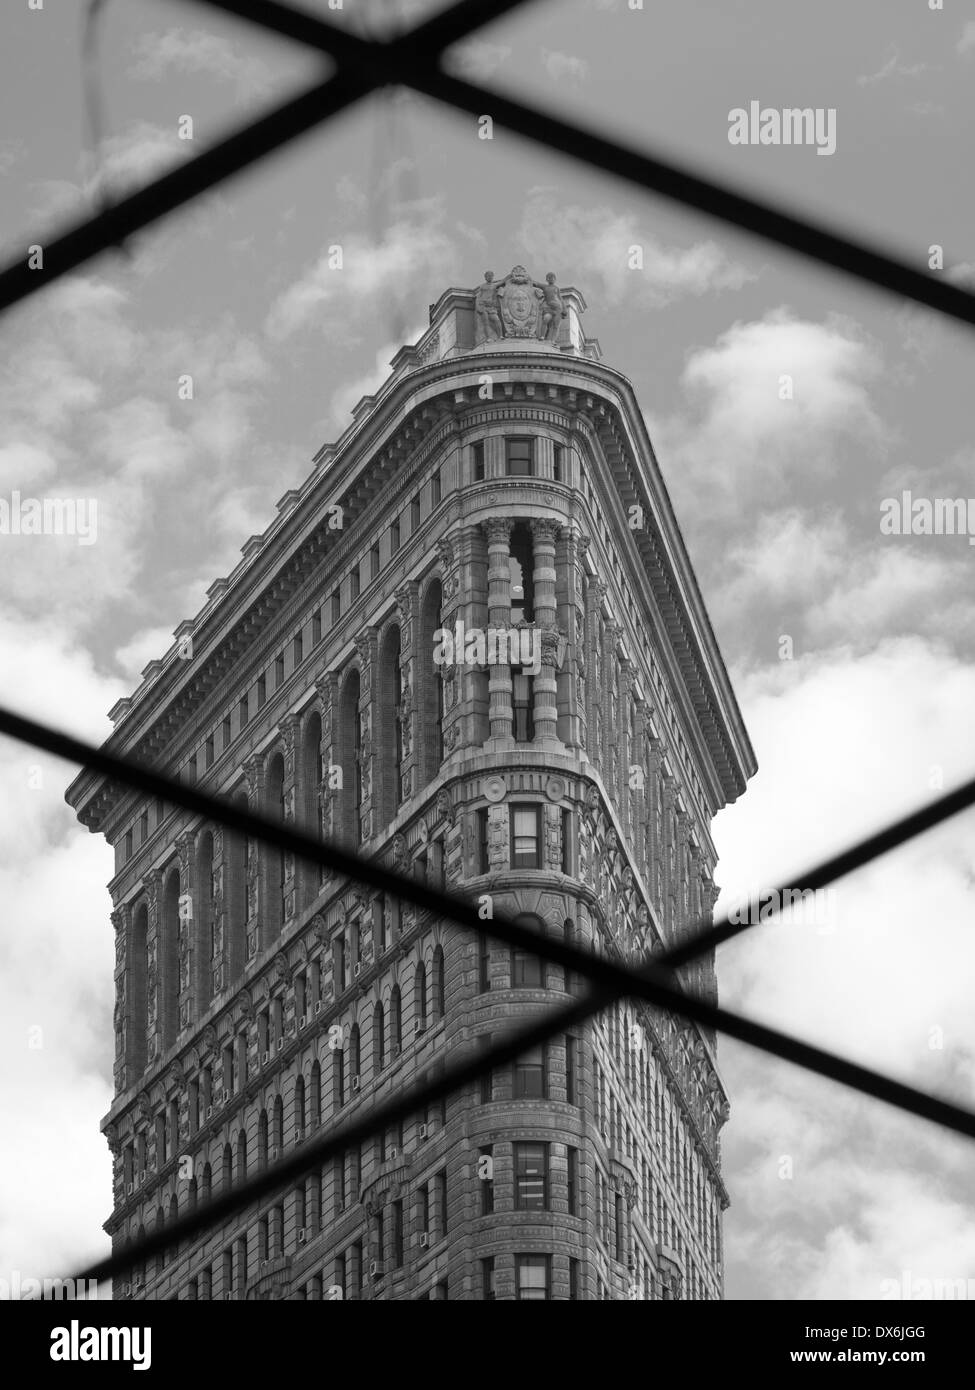 The Flatiron Building viewed through a fence, New York Stock Photo